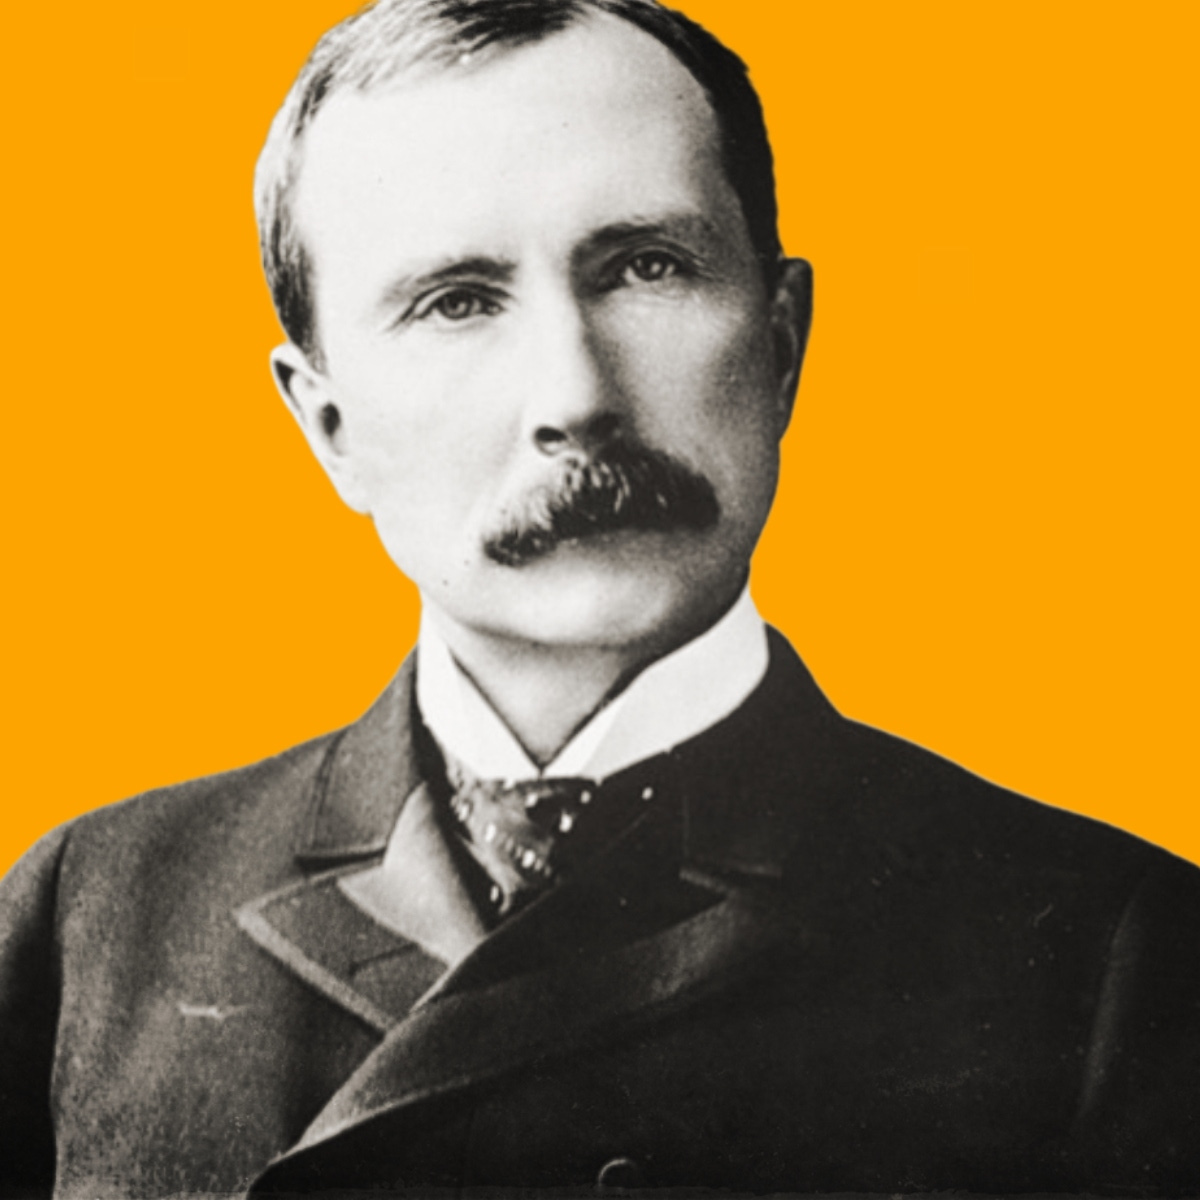 John D. Rockefeller was also called “repulsive” by the press.